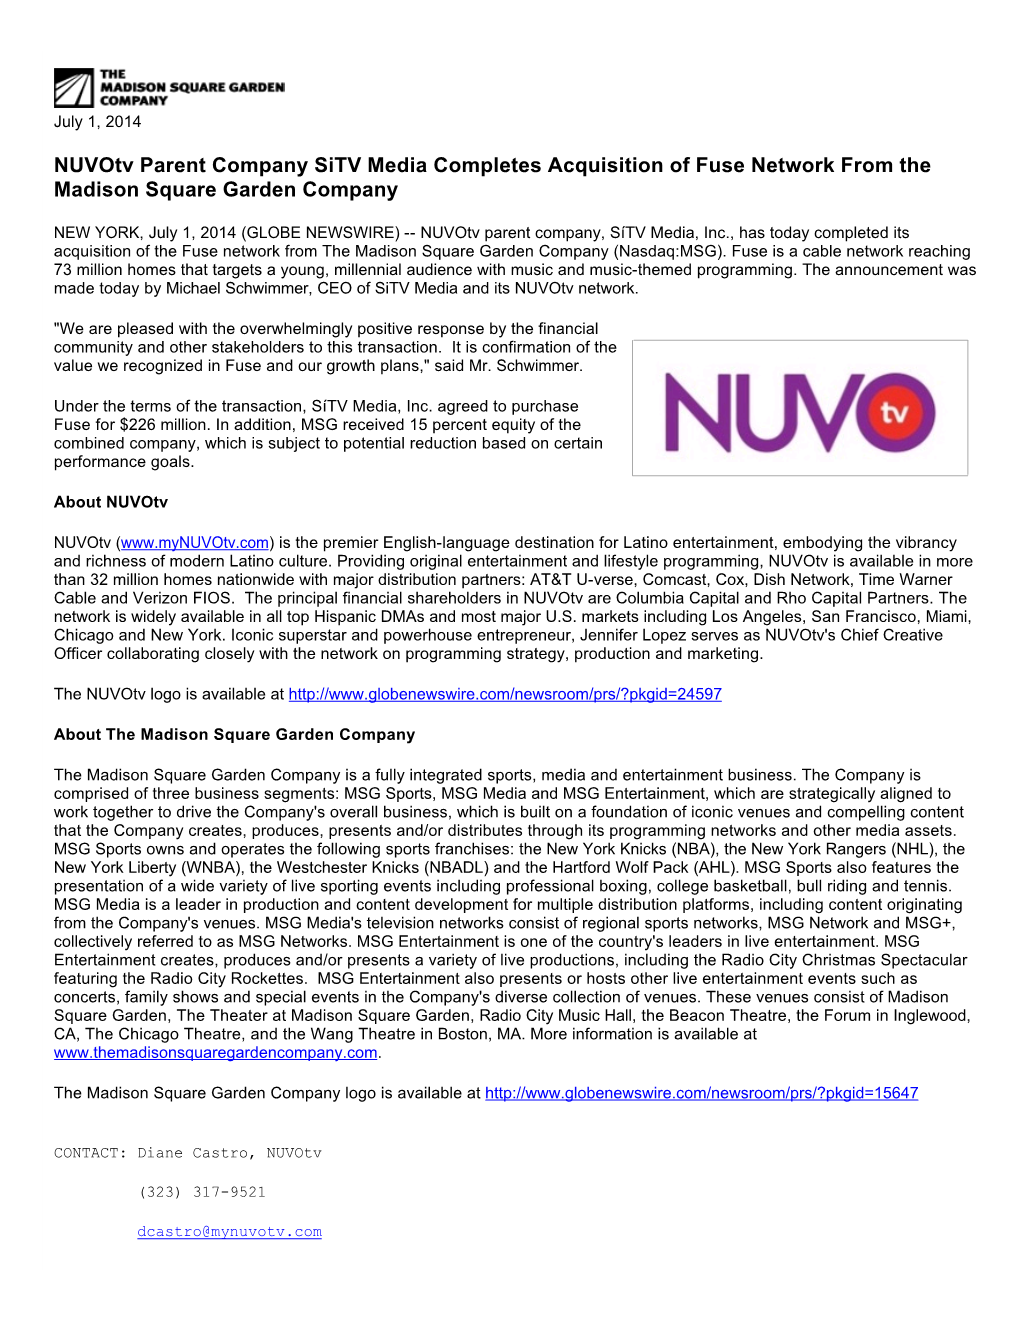 Nuvotv Parent Company Sitv Media Completes Acquisition of Fuse Network from the Madison Square Garden Company